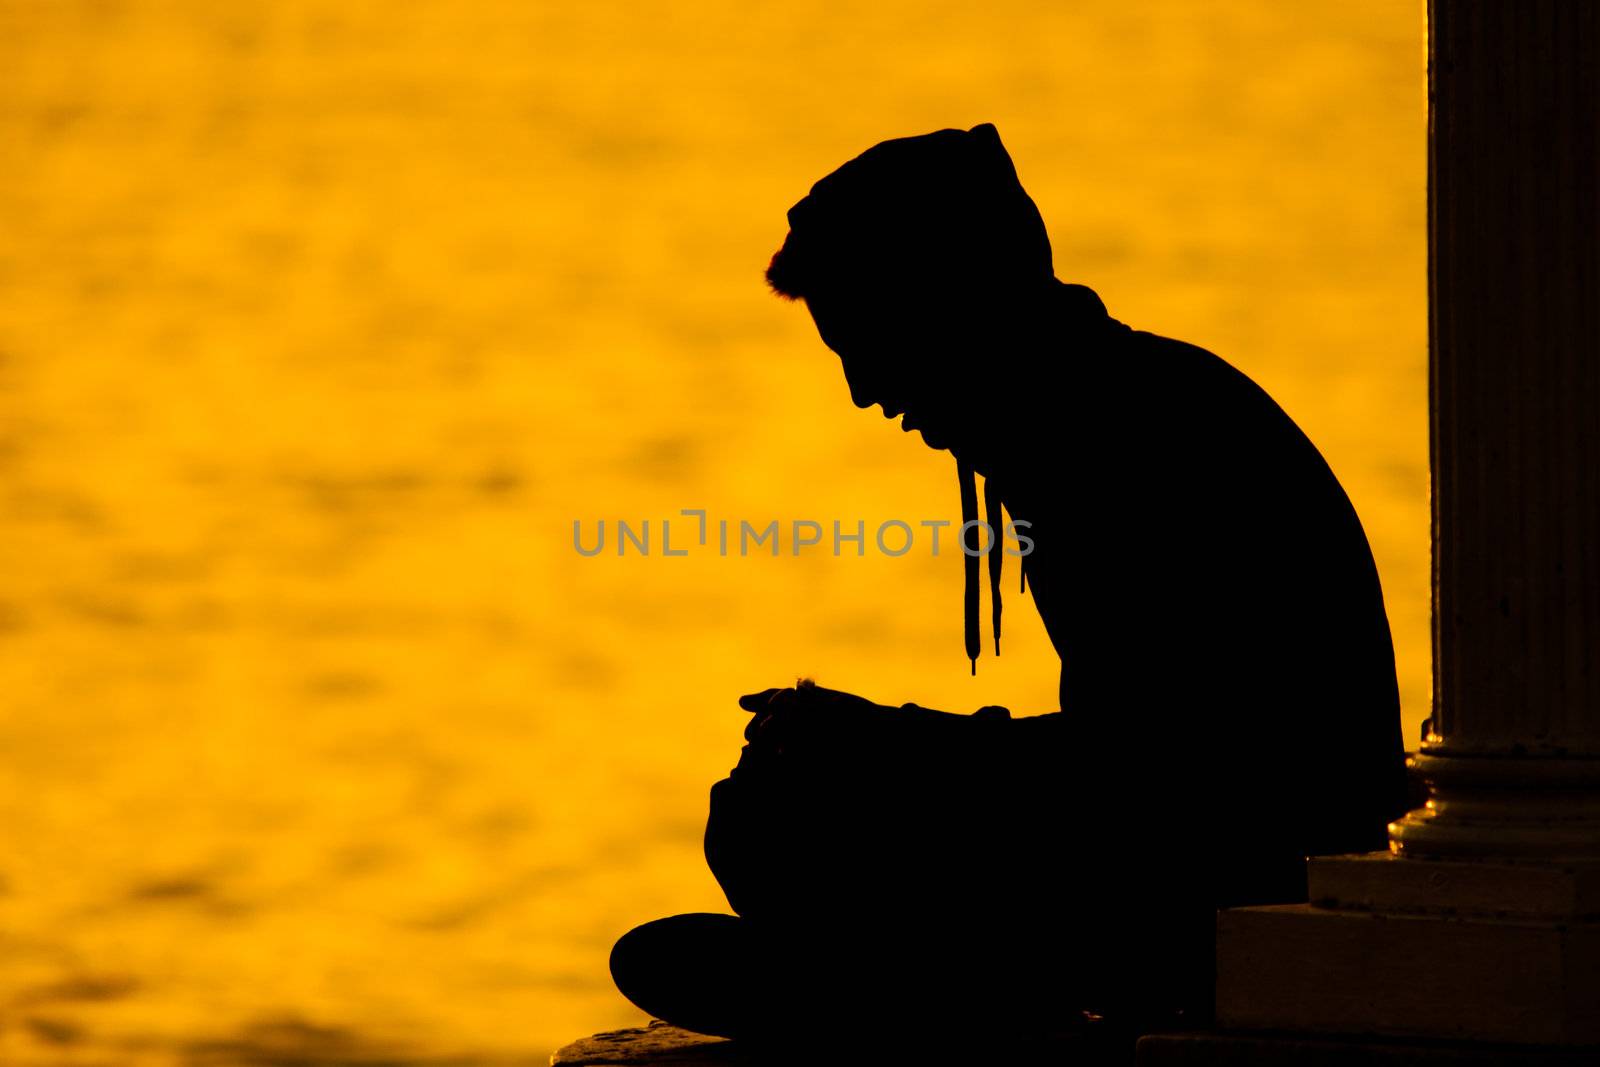 A silhouette figure of a young man sitting